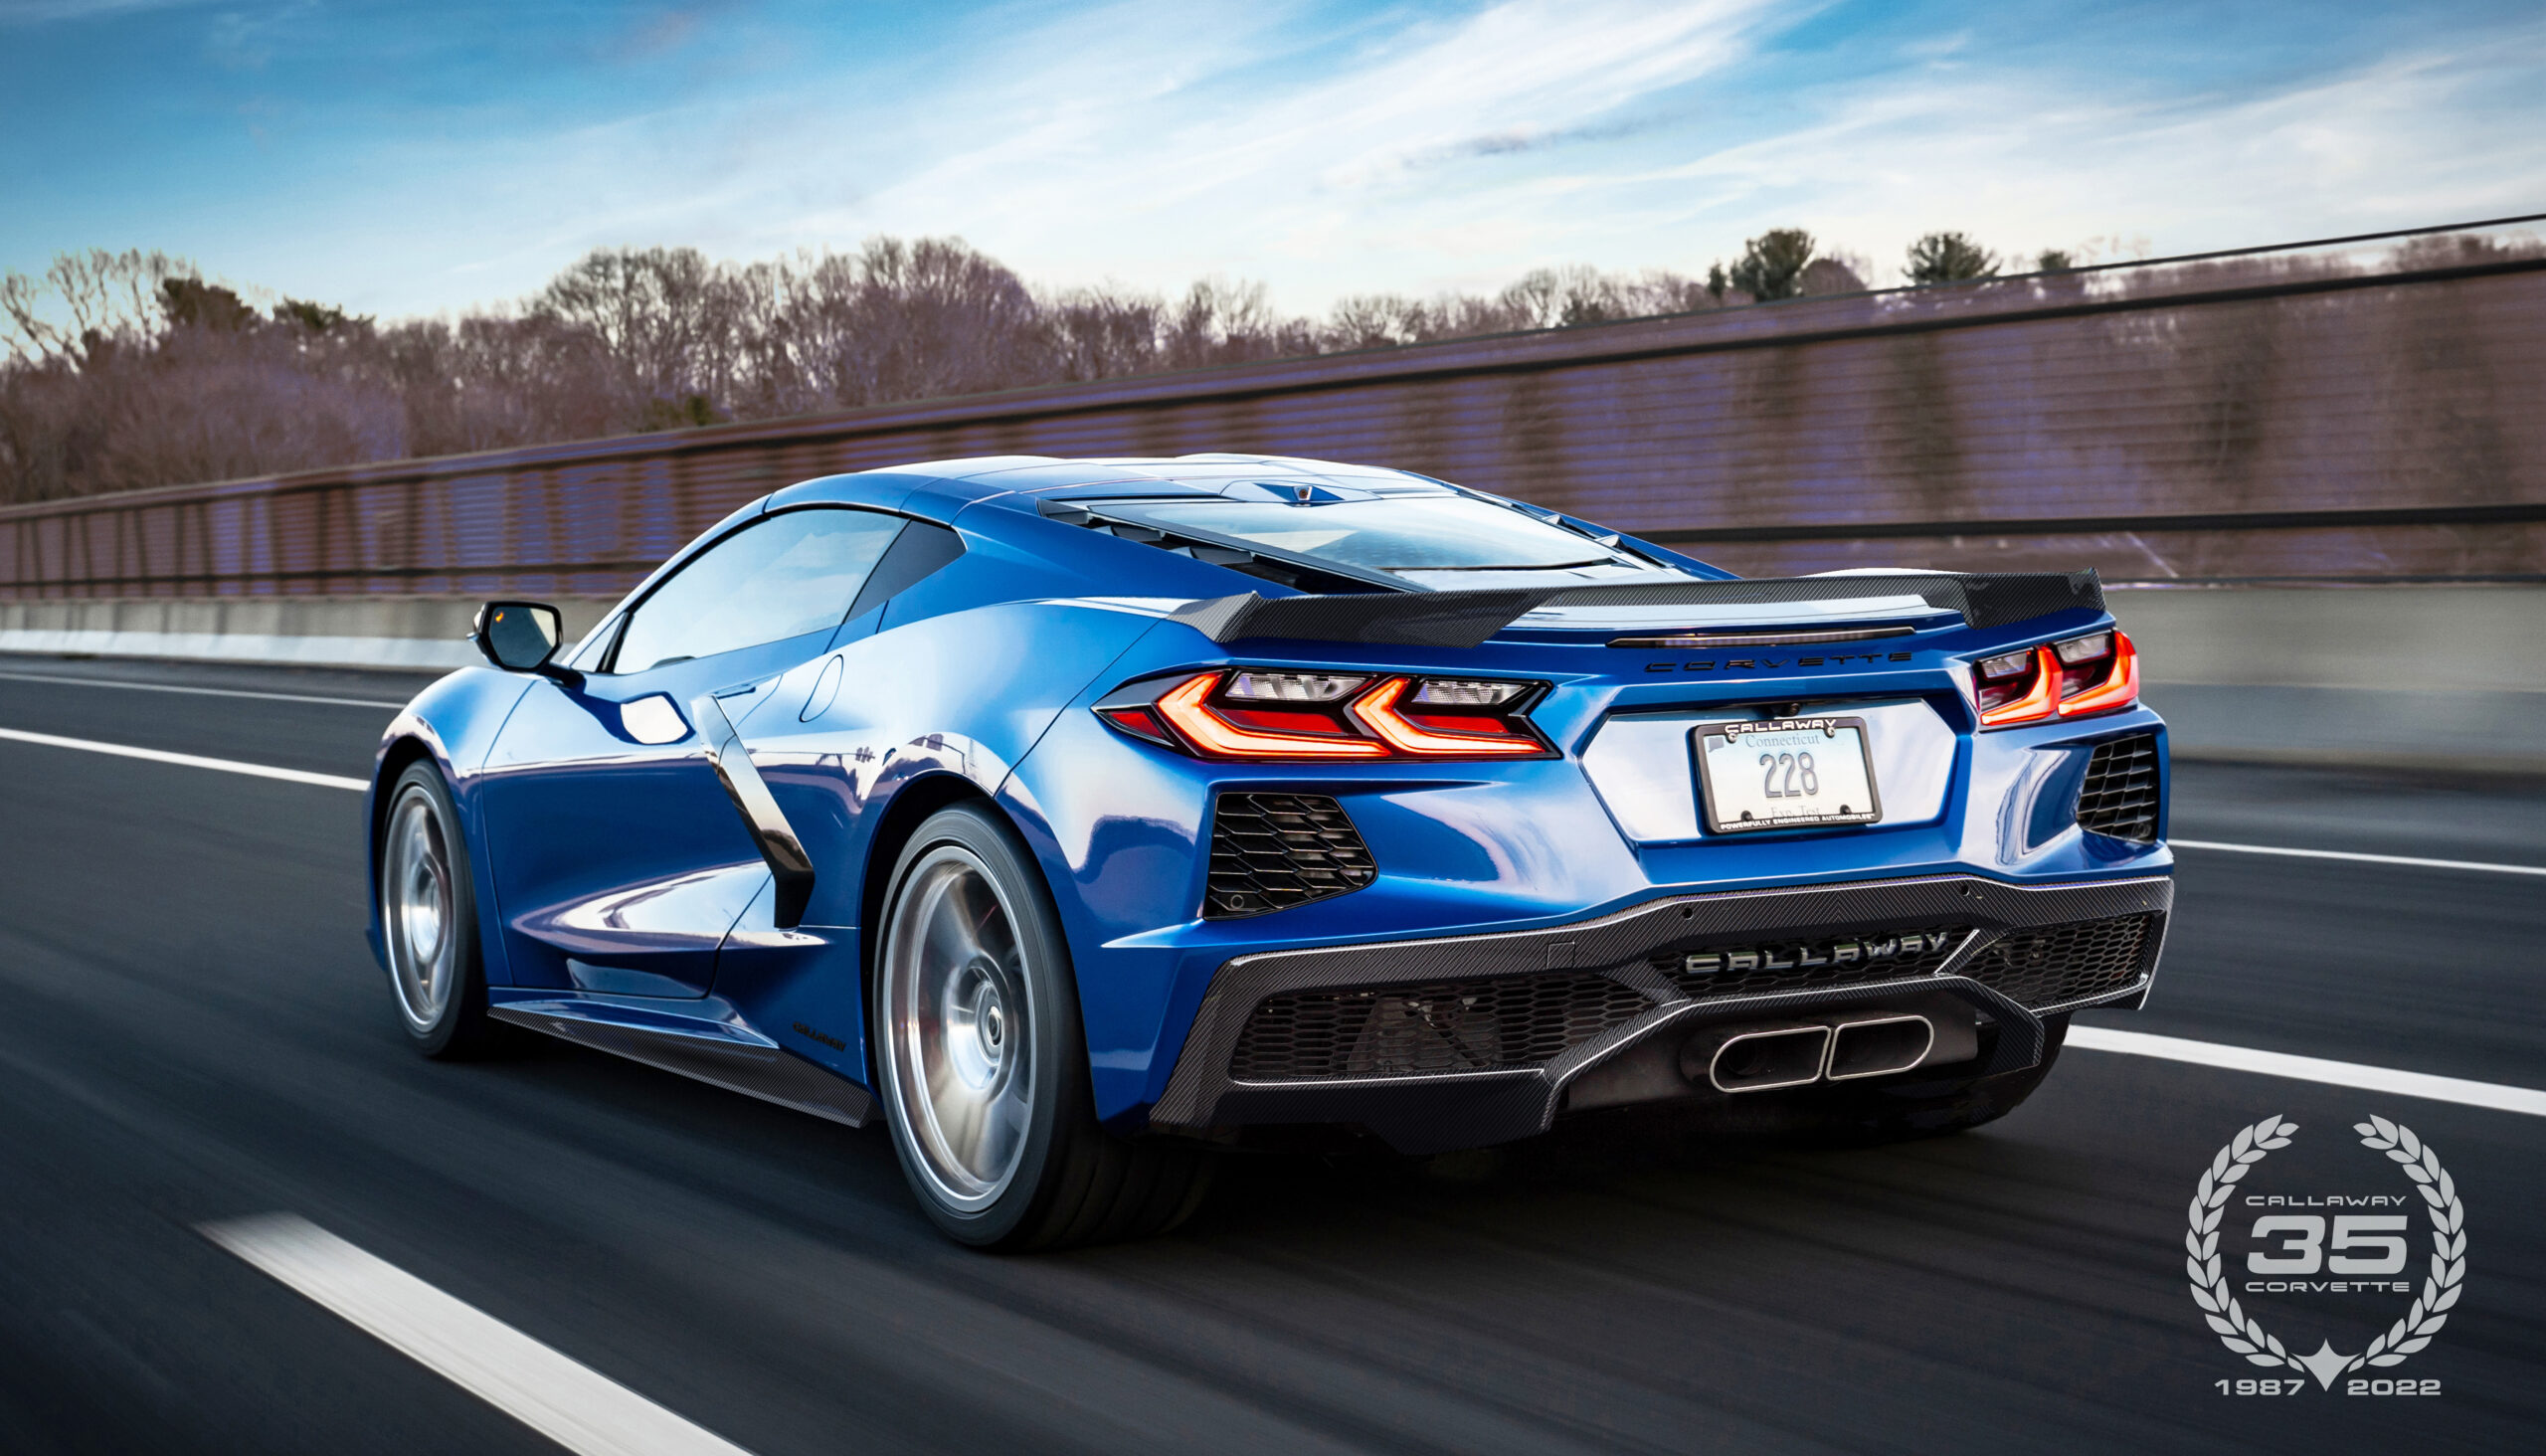 Limited Series Corvette to Celebrate Callaway Cars Partnership | THE SHOP